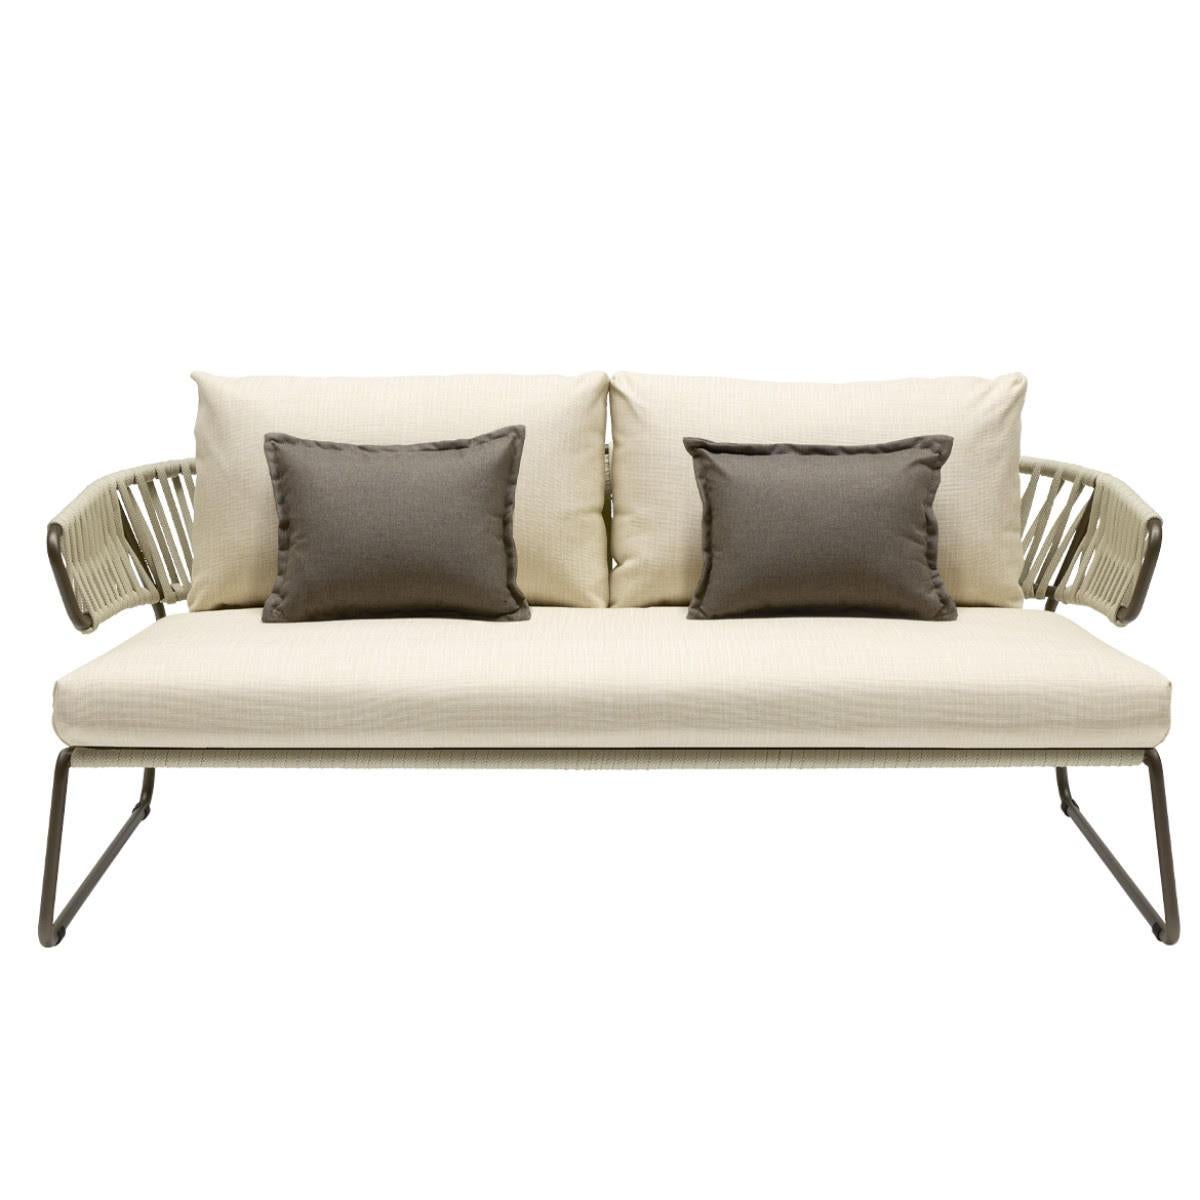 Modern Grey Outdoor or Indoor Sofa in Metal and Cord, 21 Century For Sale 1